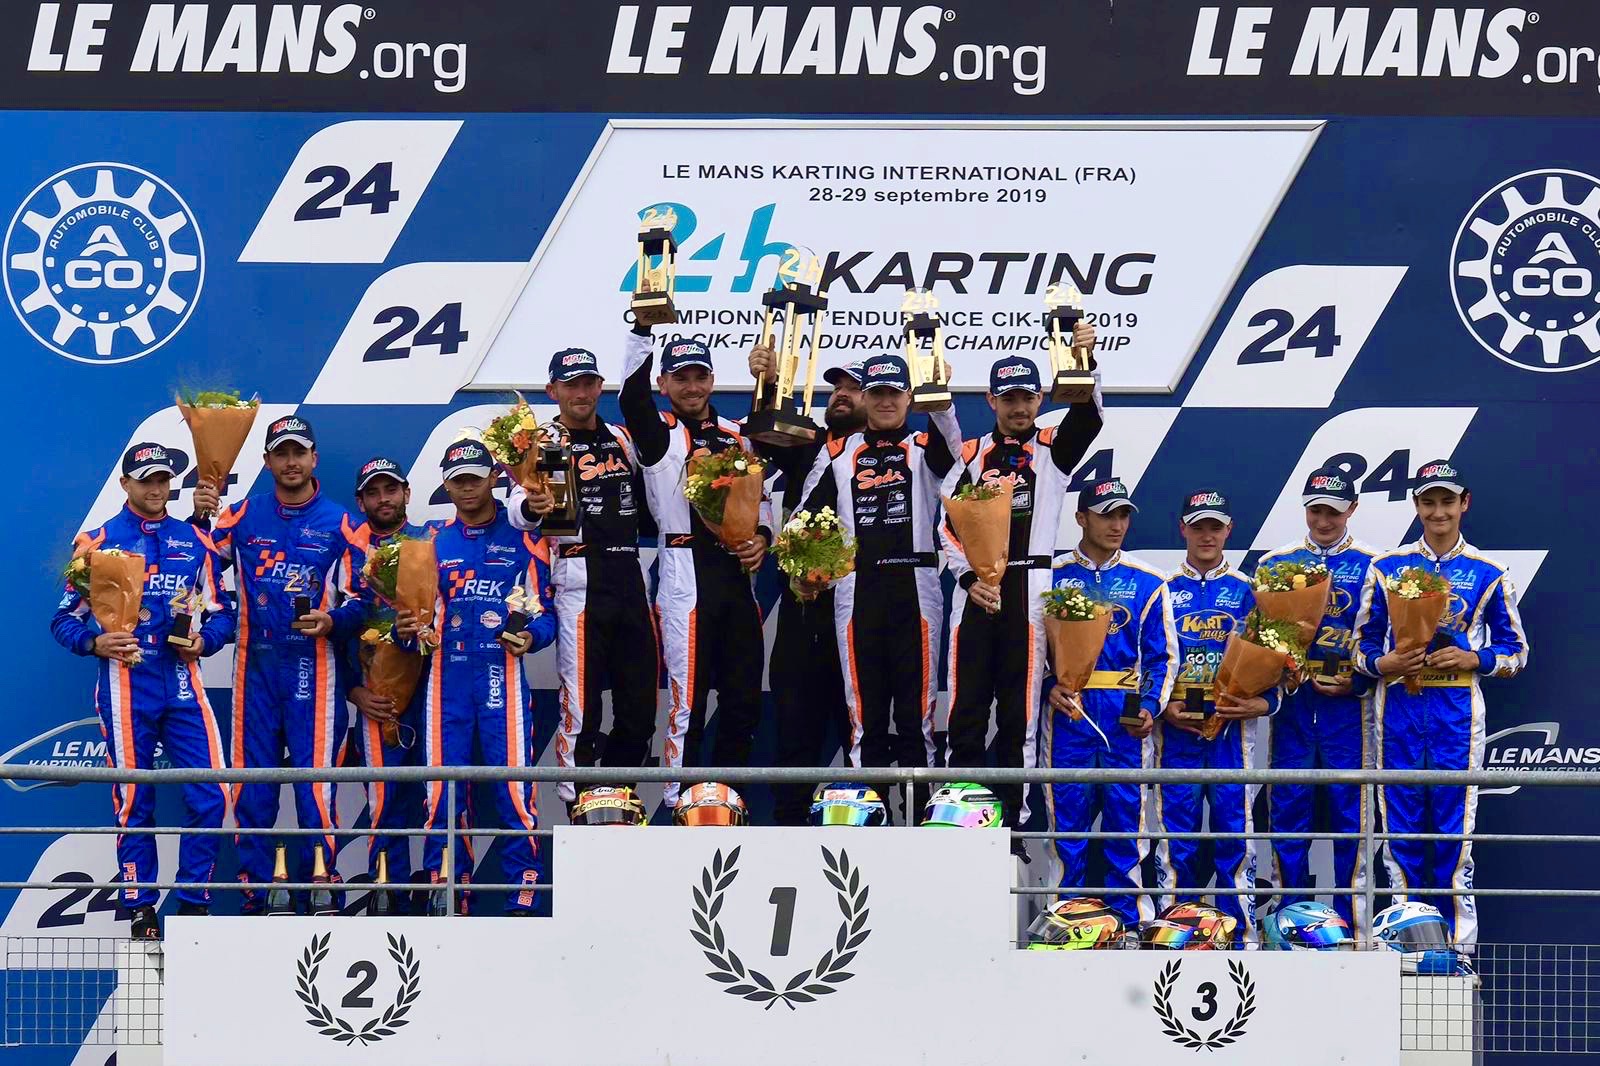 MG TIRES WAS THE EXCLUSIVE TIRE SUPPLIER FOR THE 24 HOUR KARTING LE MANS IN THE CIK / FIA CATEGORY